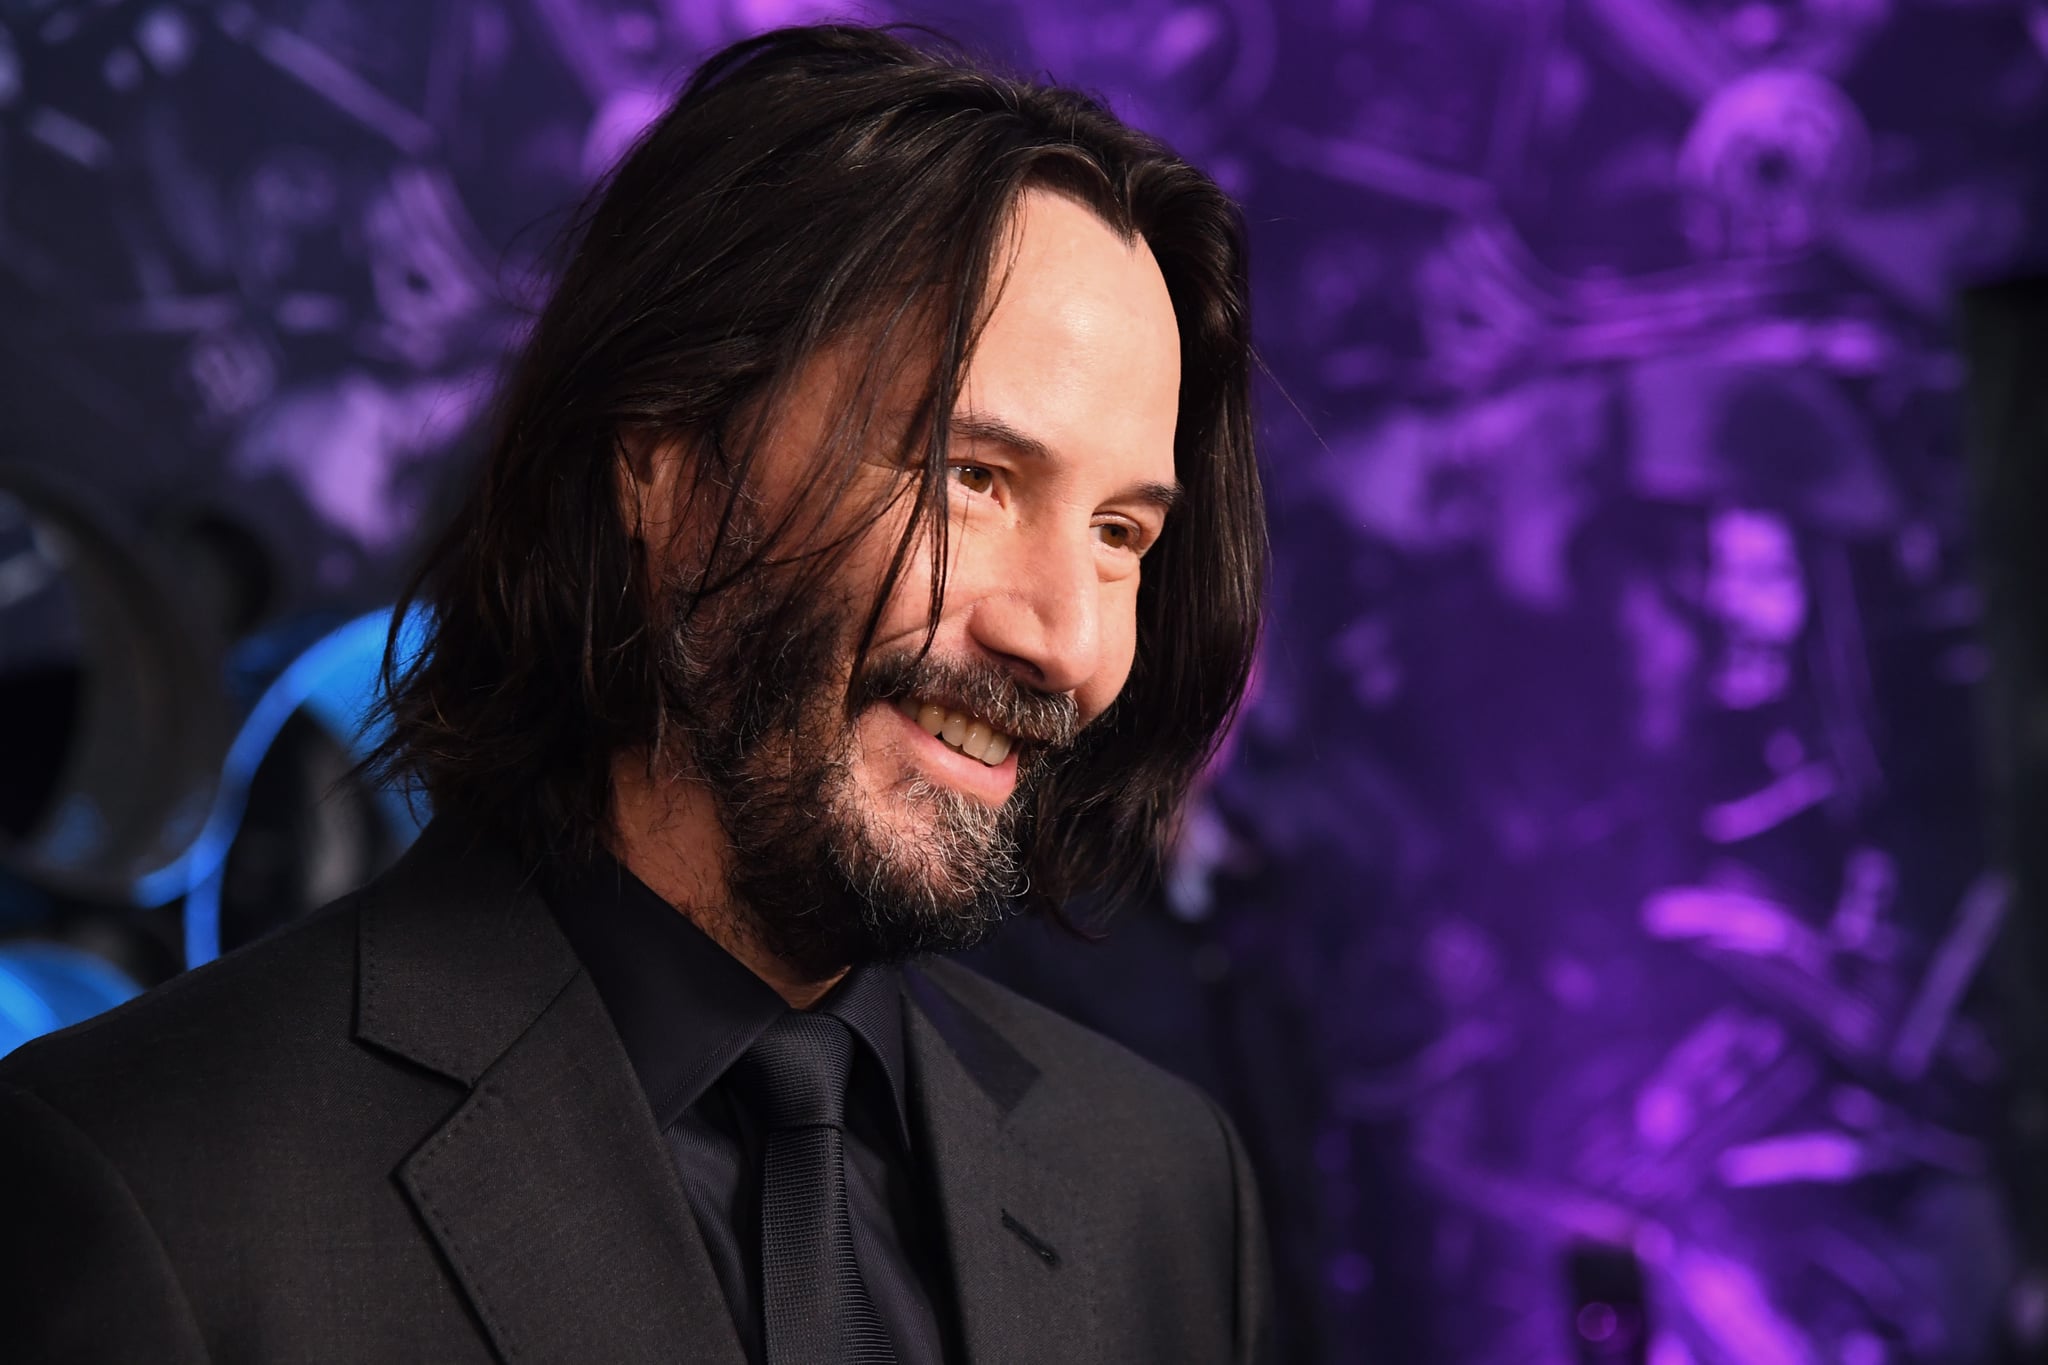 LONDON, ENGLAND - MAY 03: Keanu Reeves attends the John Wick special screenings at Ham Yard Hotel on May 03, 2019 in London, England. (Photo by Dave J Hogan/Getty Images for Lionsgate )